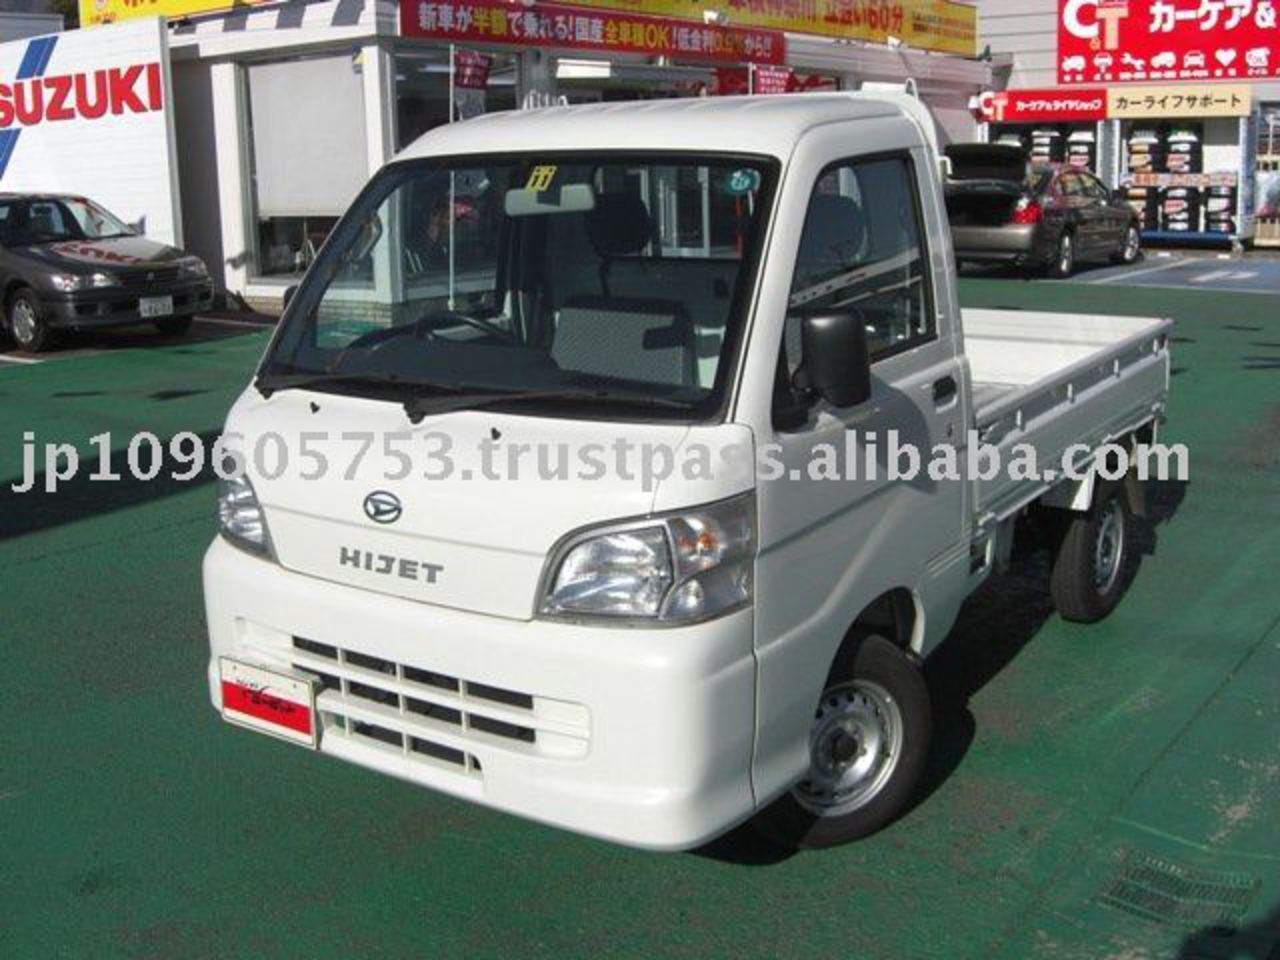 Daihatsu Hi Jet Pick up: Photo gallery, complete information about ...